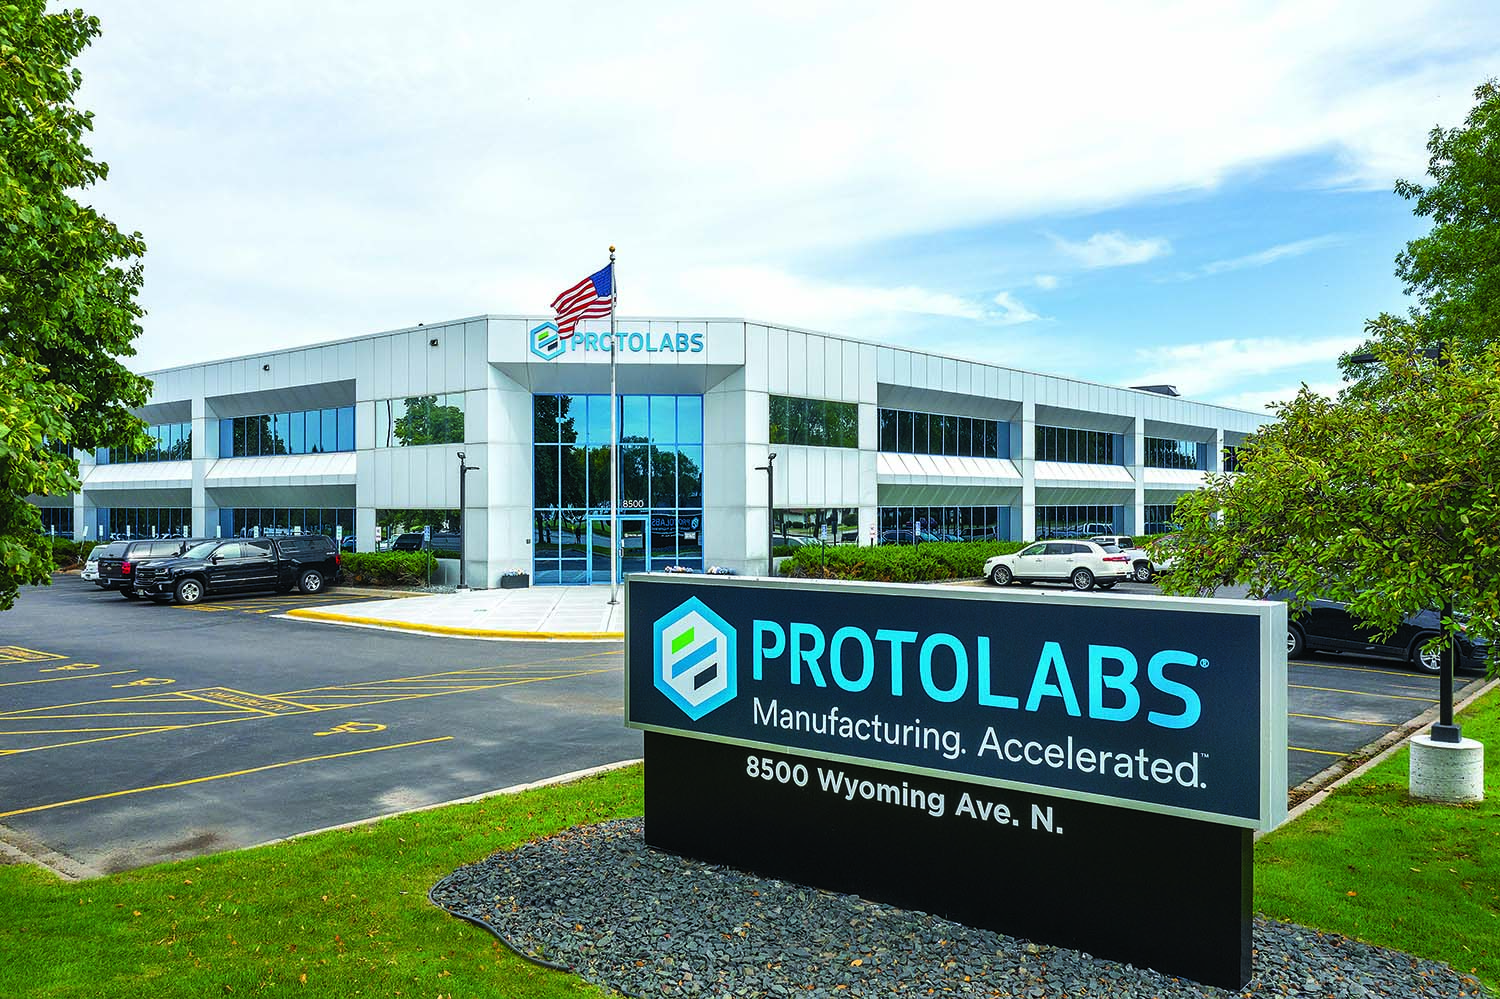 Protolabs’ 215,000-sq.-ft. facility in Brooklyn Park, Minnesota, contains more than 300 CNC mills and lathes.